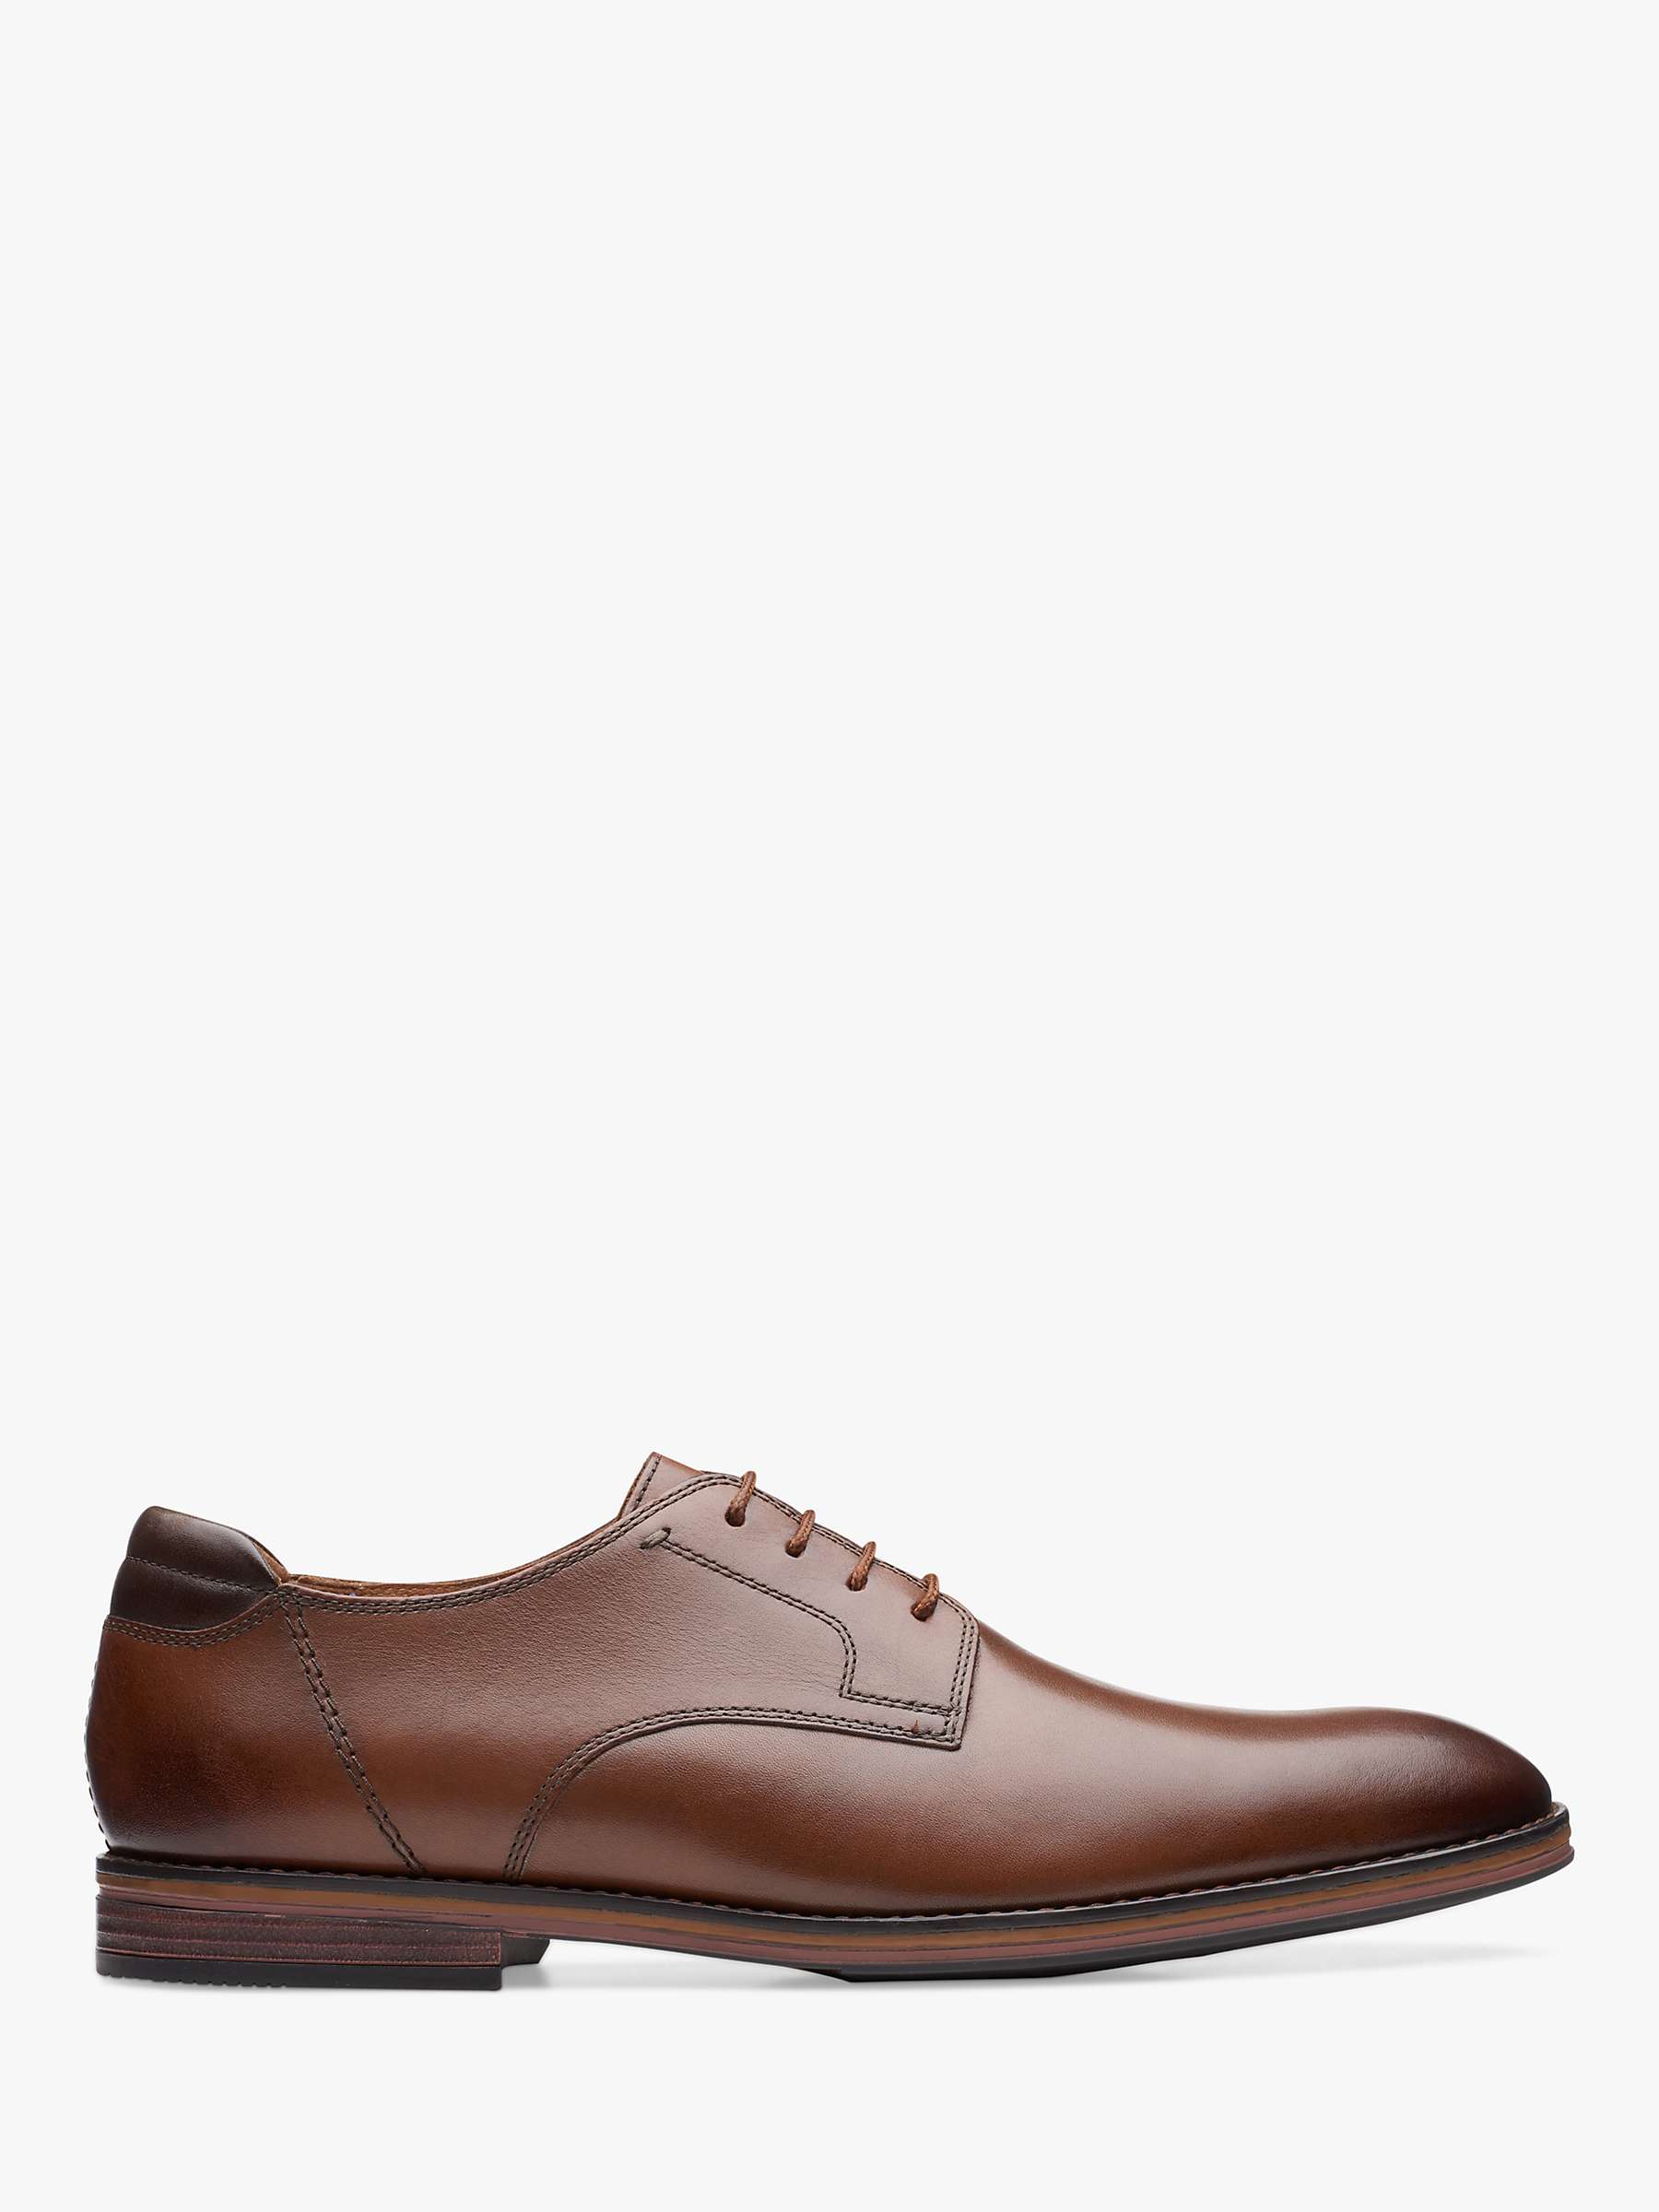 Buy Clarks CitiStride Walk Leather Shoes Online at johnlewis.com